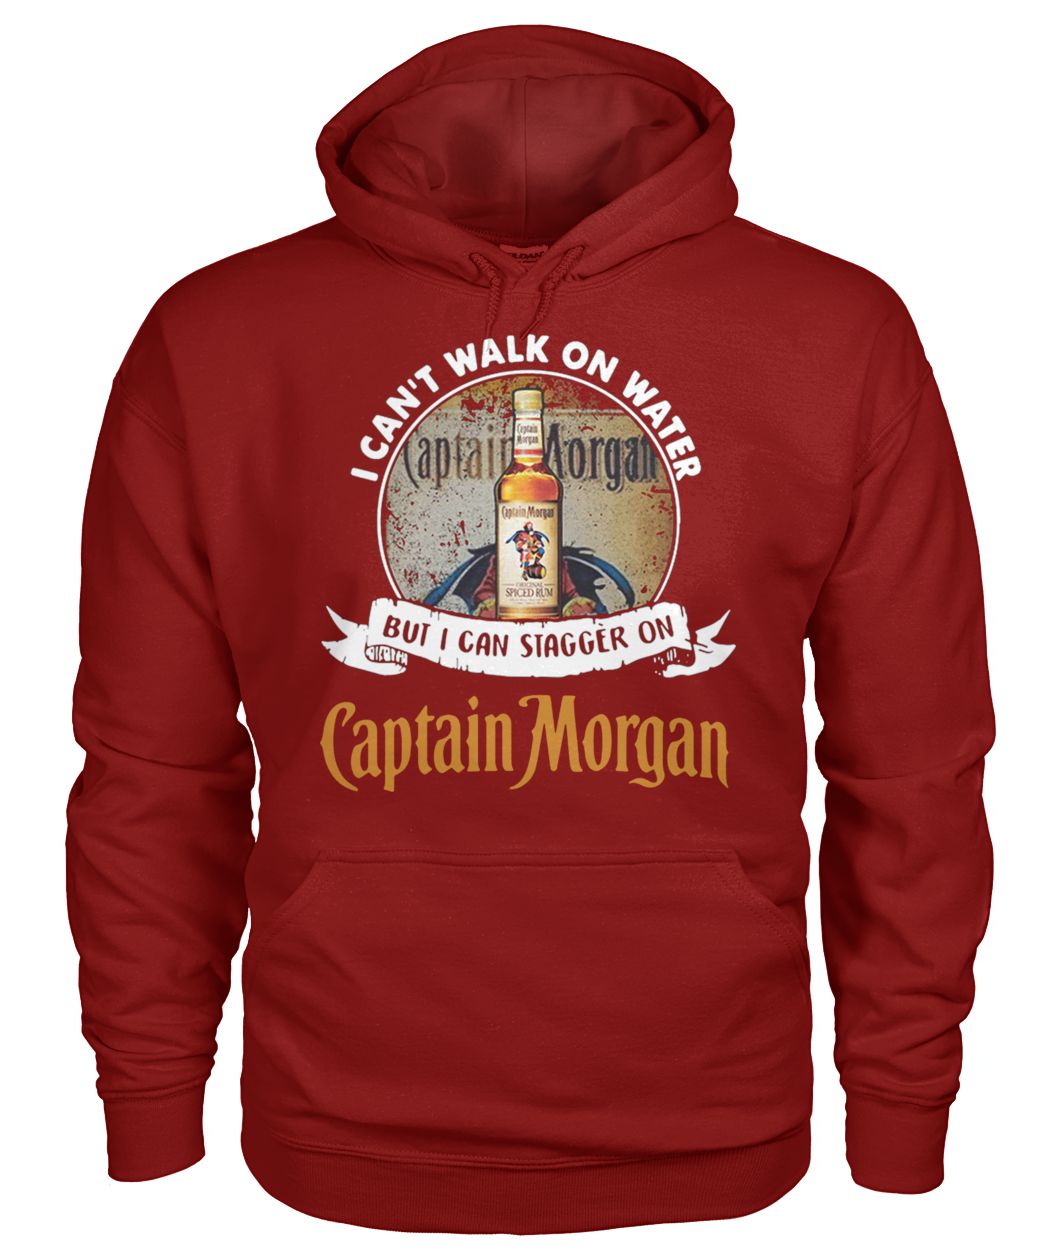 I can't walk on water but I can stagger on Captain Morgan gildan hoodie